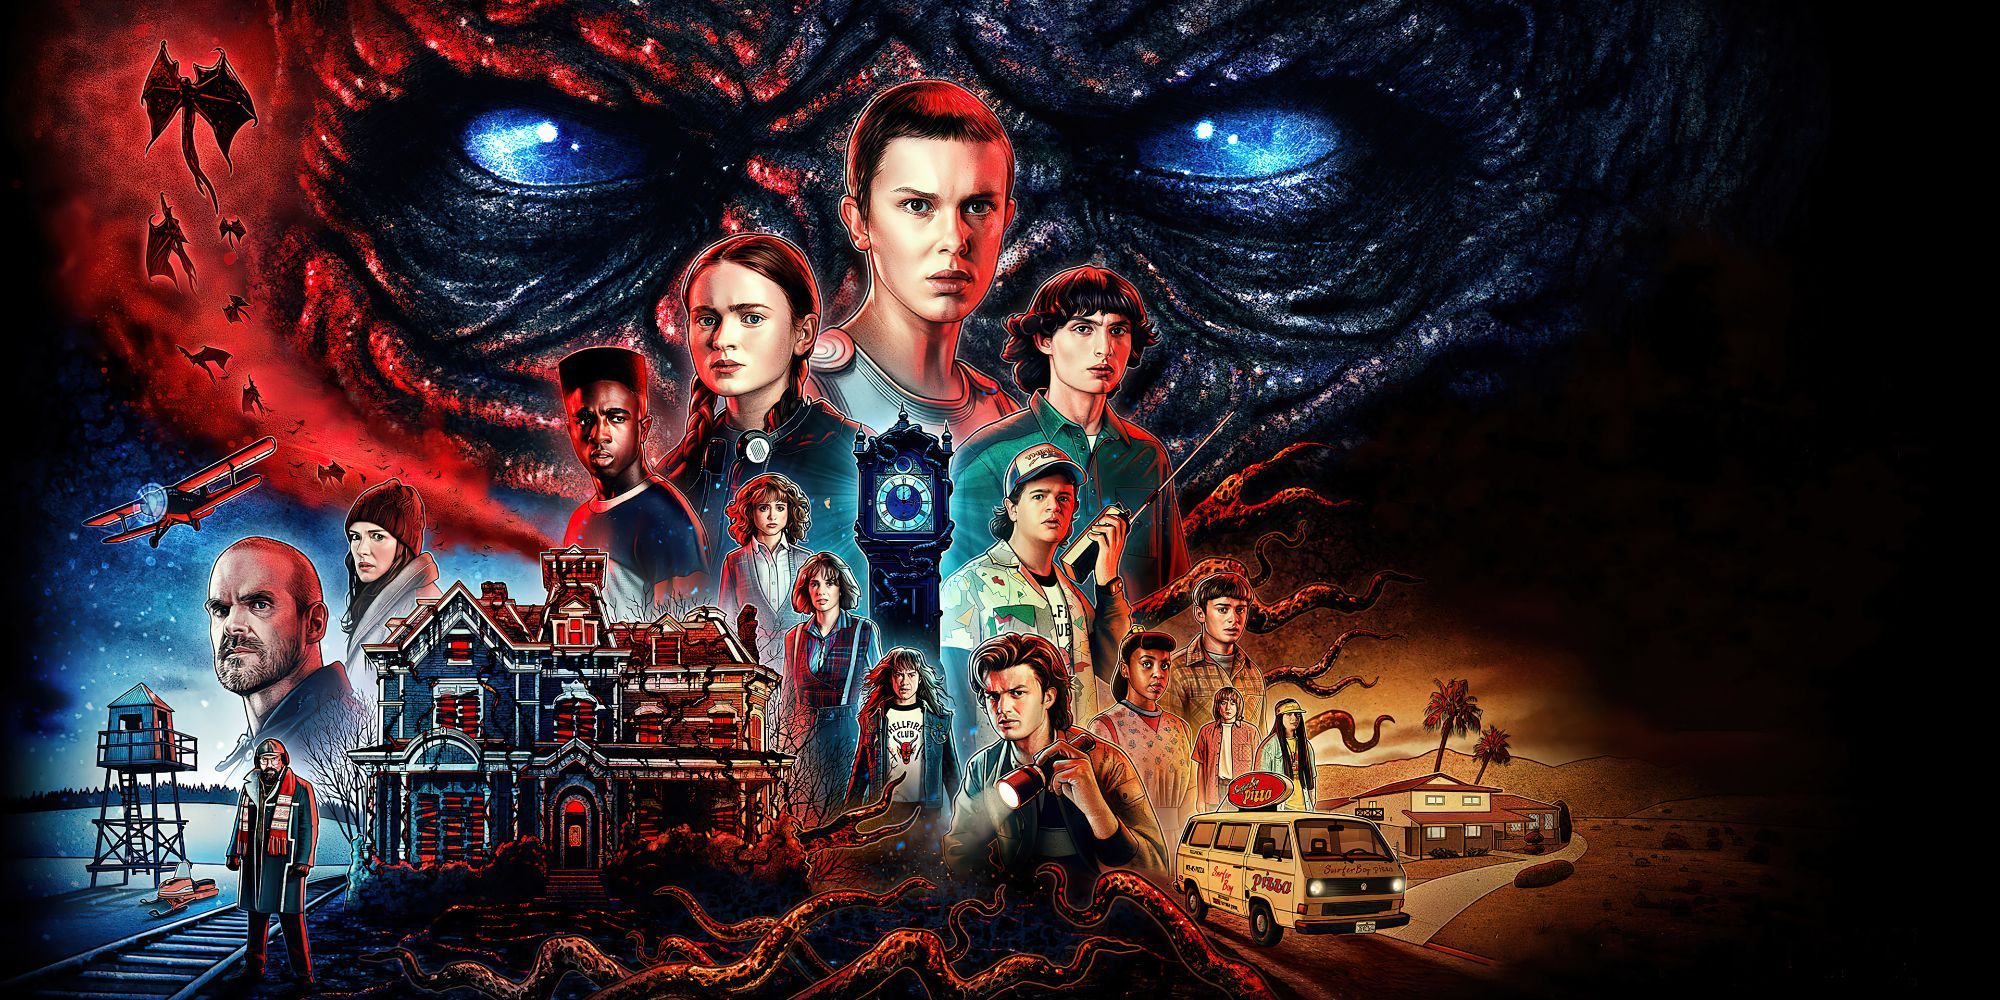 poster of Stranger Things season 4 featuring the cast including Millie Bobby Brown and others